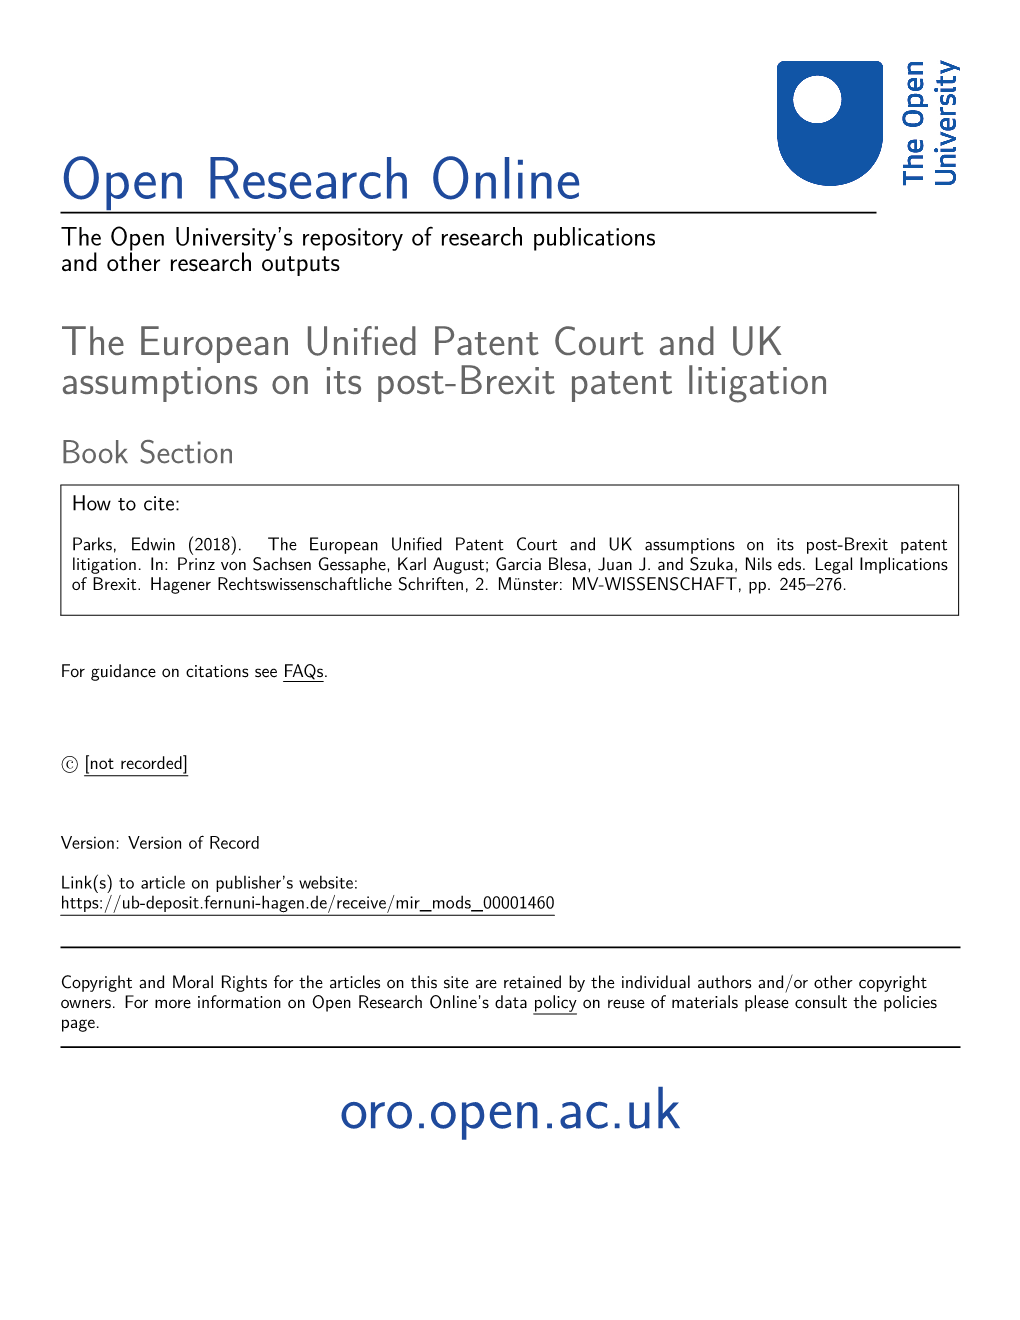 The European Unified Patent Court and UK Assumptions on Its Post-Brexit Patent Litigation